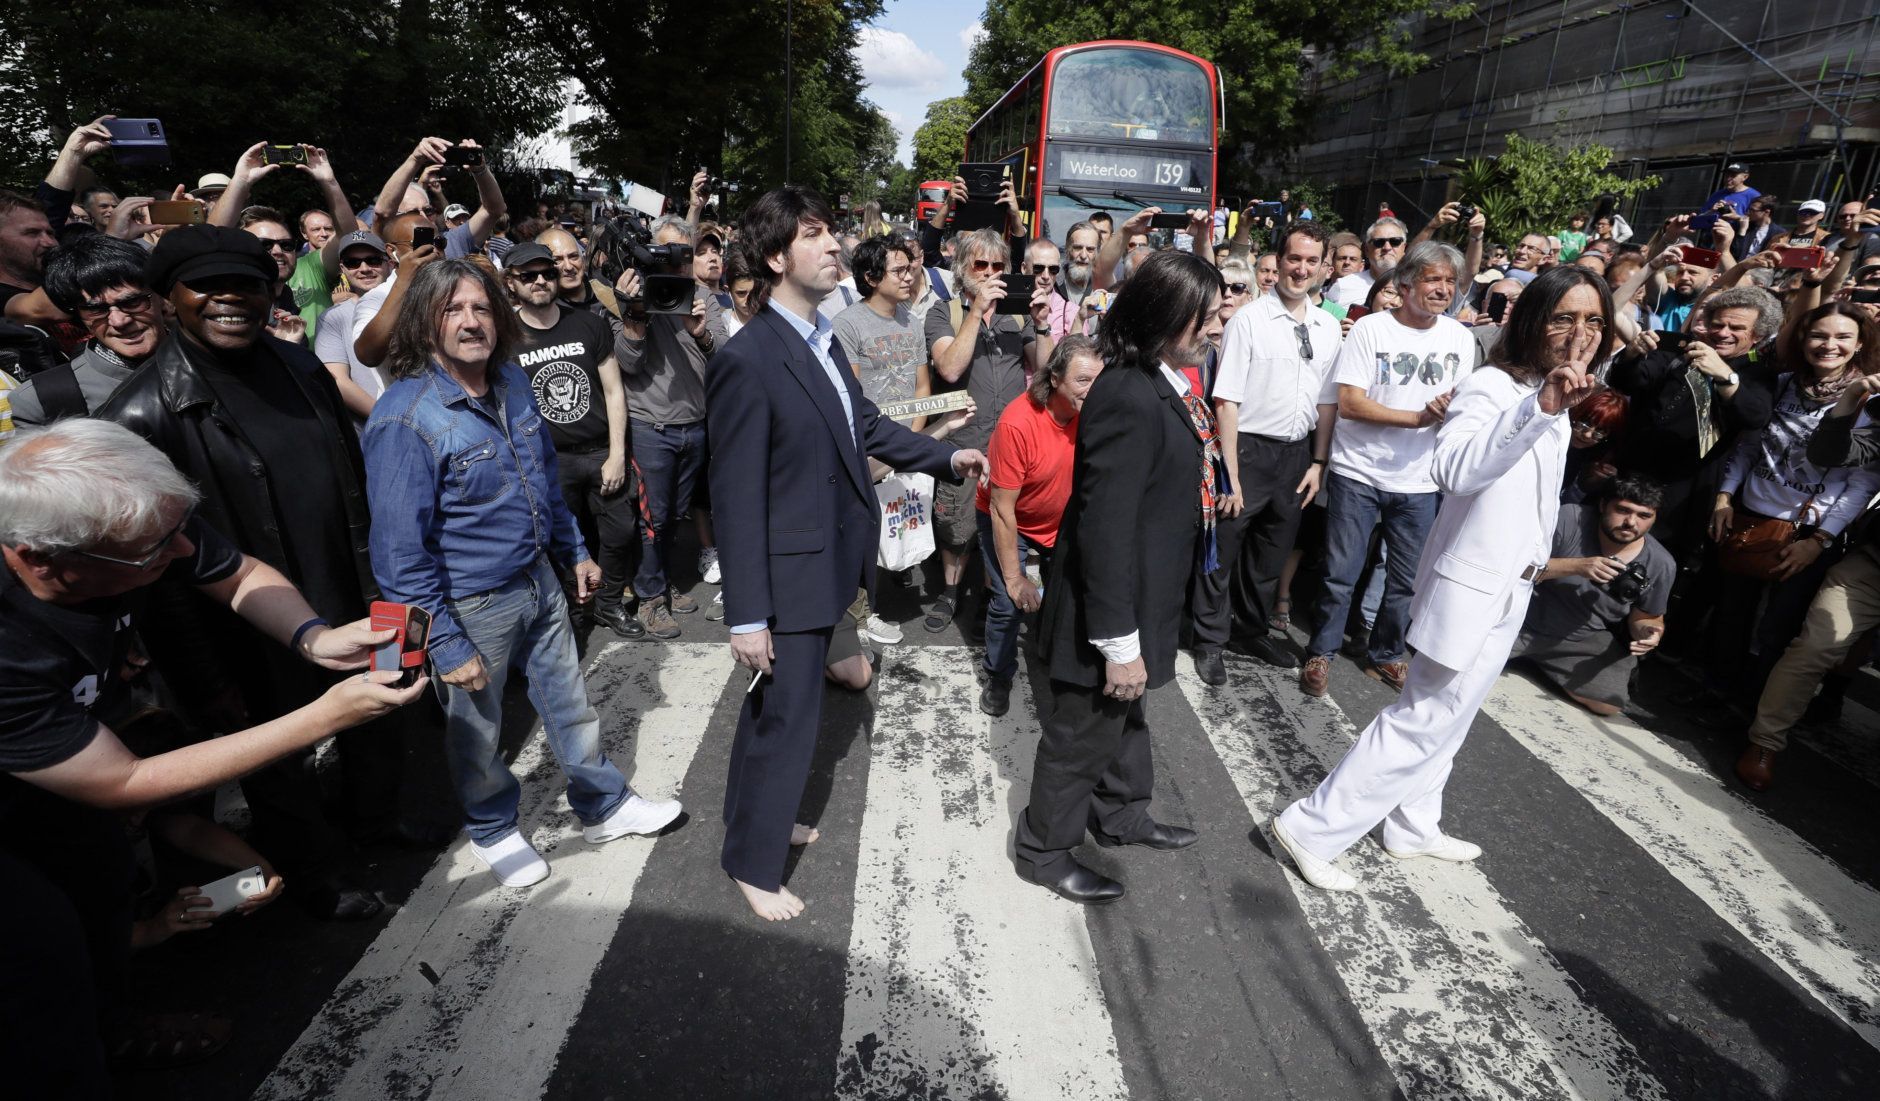 Fans dressed as lookalikes walk across the Abbey Road zebra crossing on the 50th anniversary of British pop musicians The Beatles doing it for their album cover of 'Abbey Road' in St Johns Wood in London, Thursday, Aug. 8, 2019. They aimed to cross 50 years to the minute since the 'Fab Four' were photographed for the album. (AP Photo/Kirsty Wigglesworth)